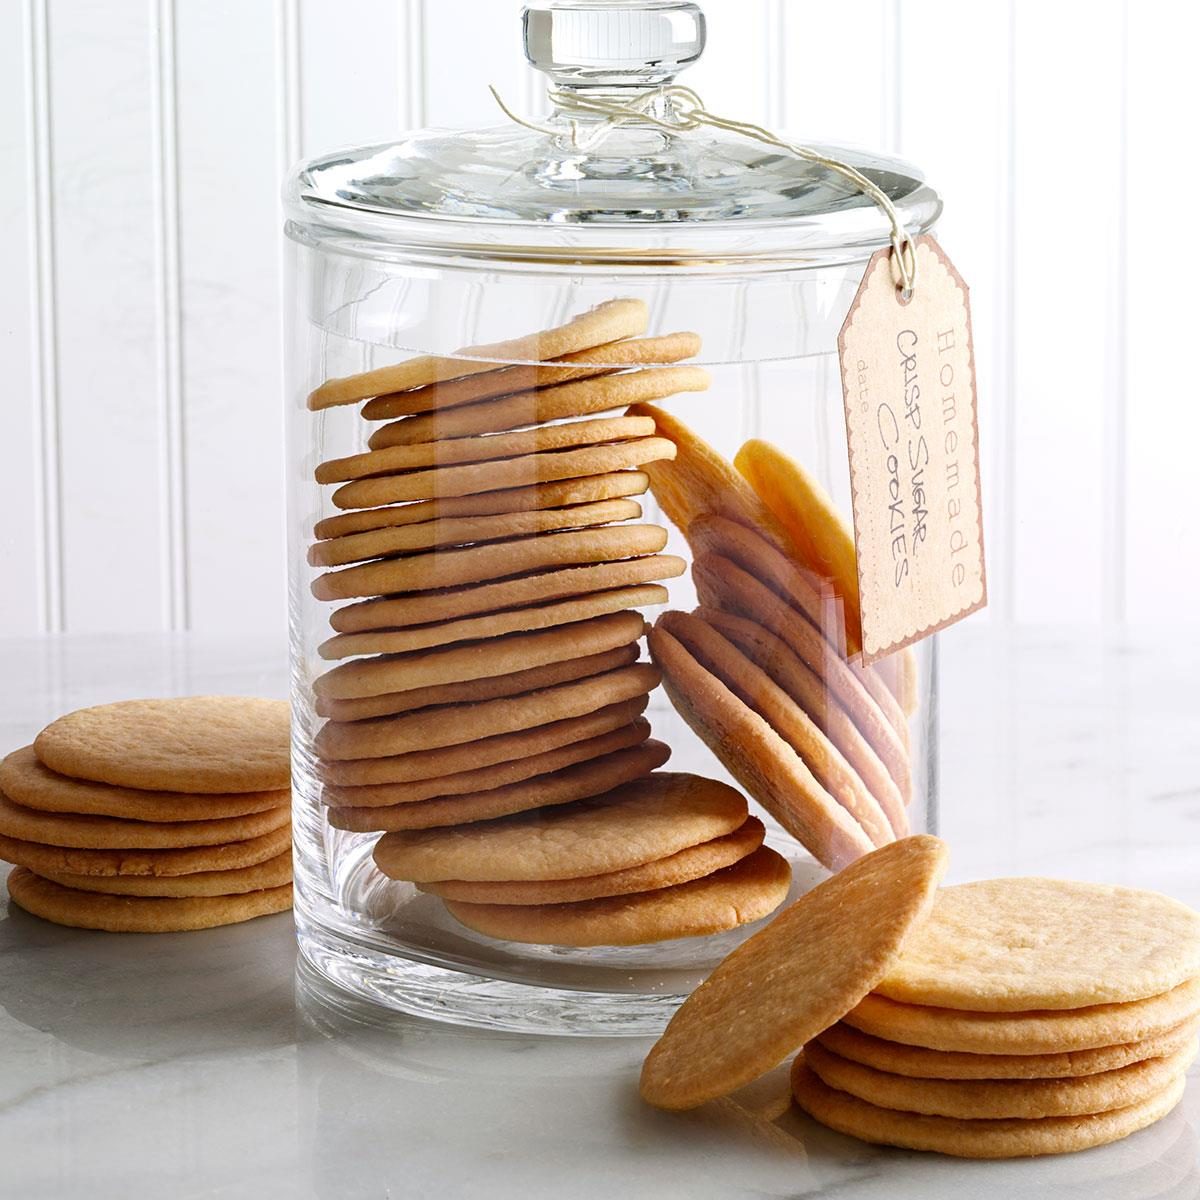 How to store biscuits or cookies in an airtight container to keep them  fresh - Quora